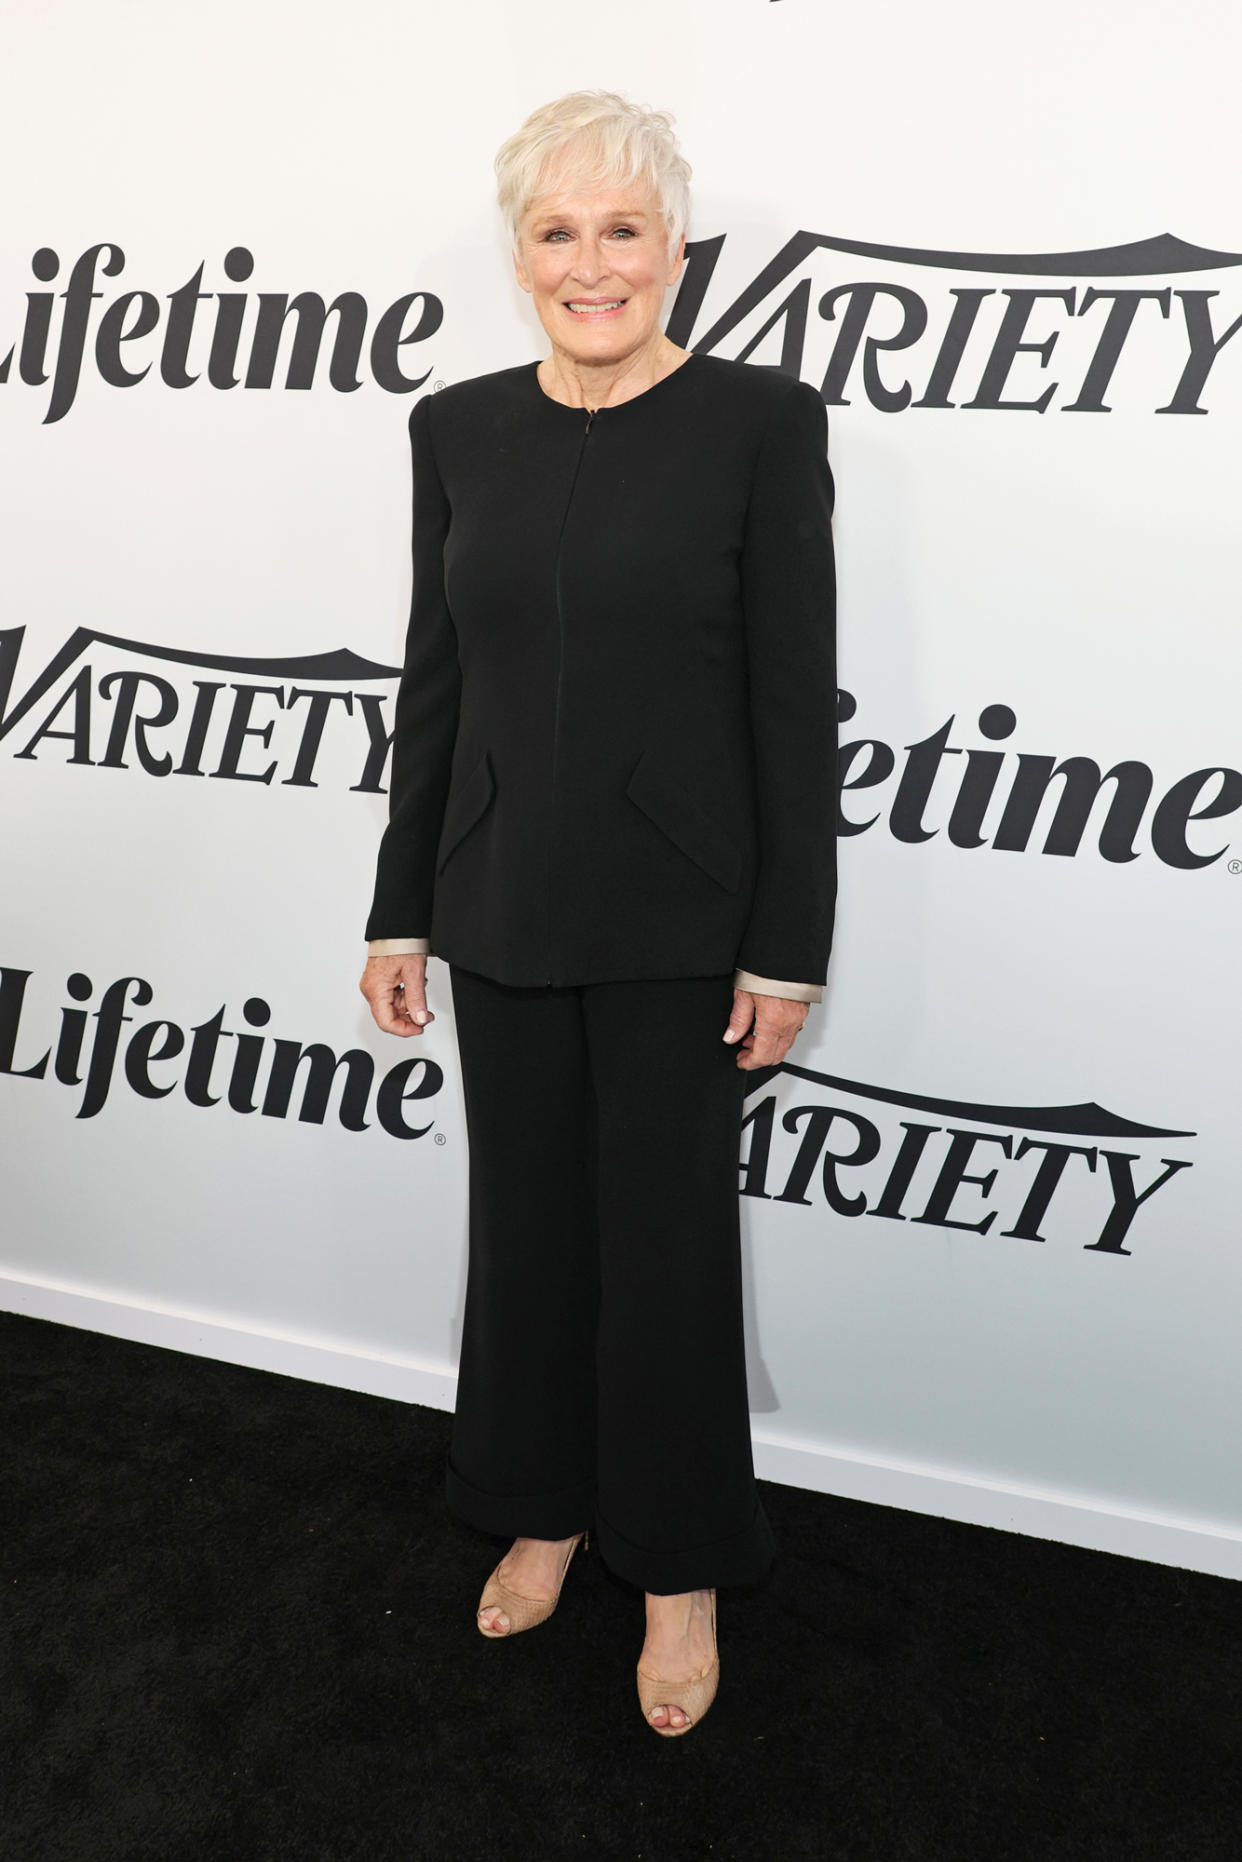 Glenn Close Looks Sophisticated in All Black at Variety Power of Women Event